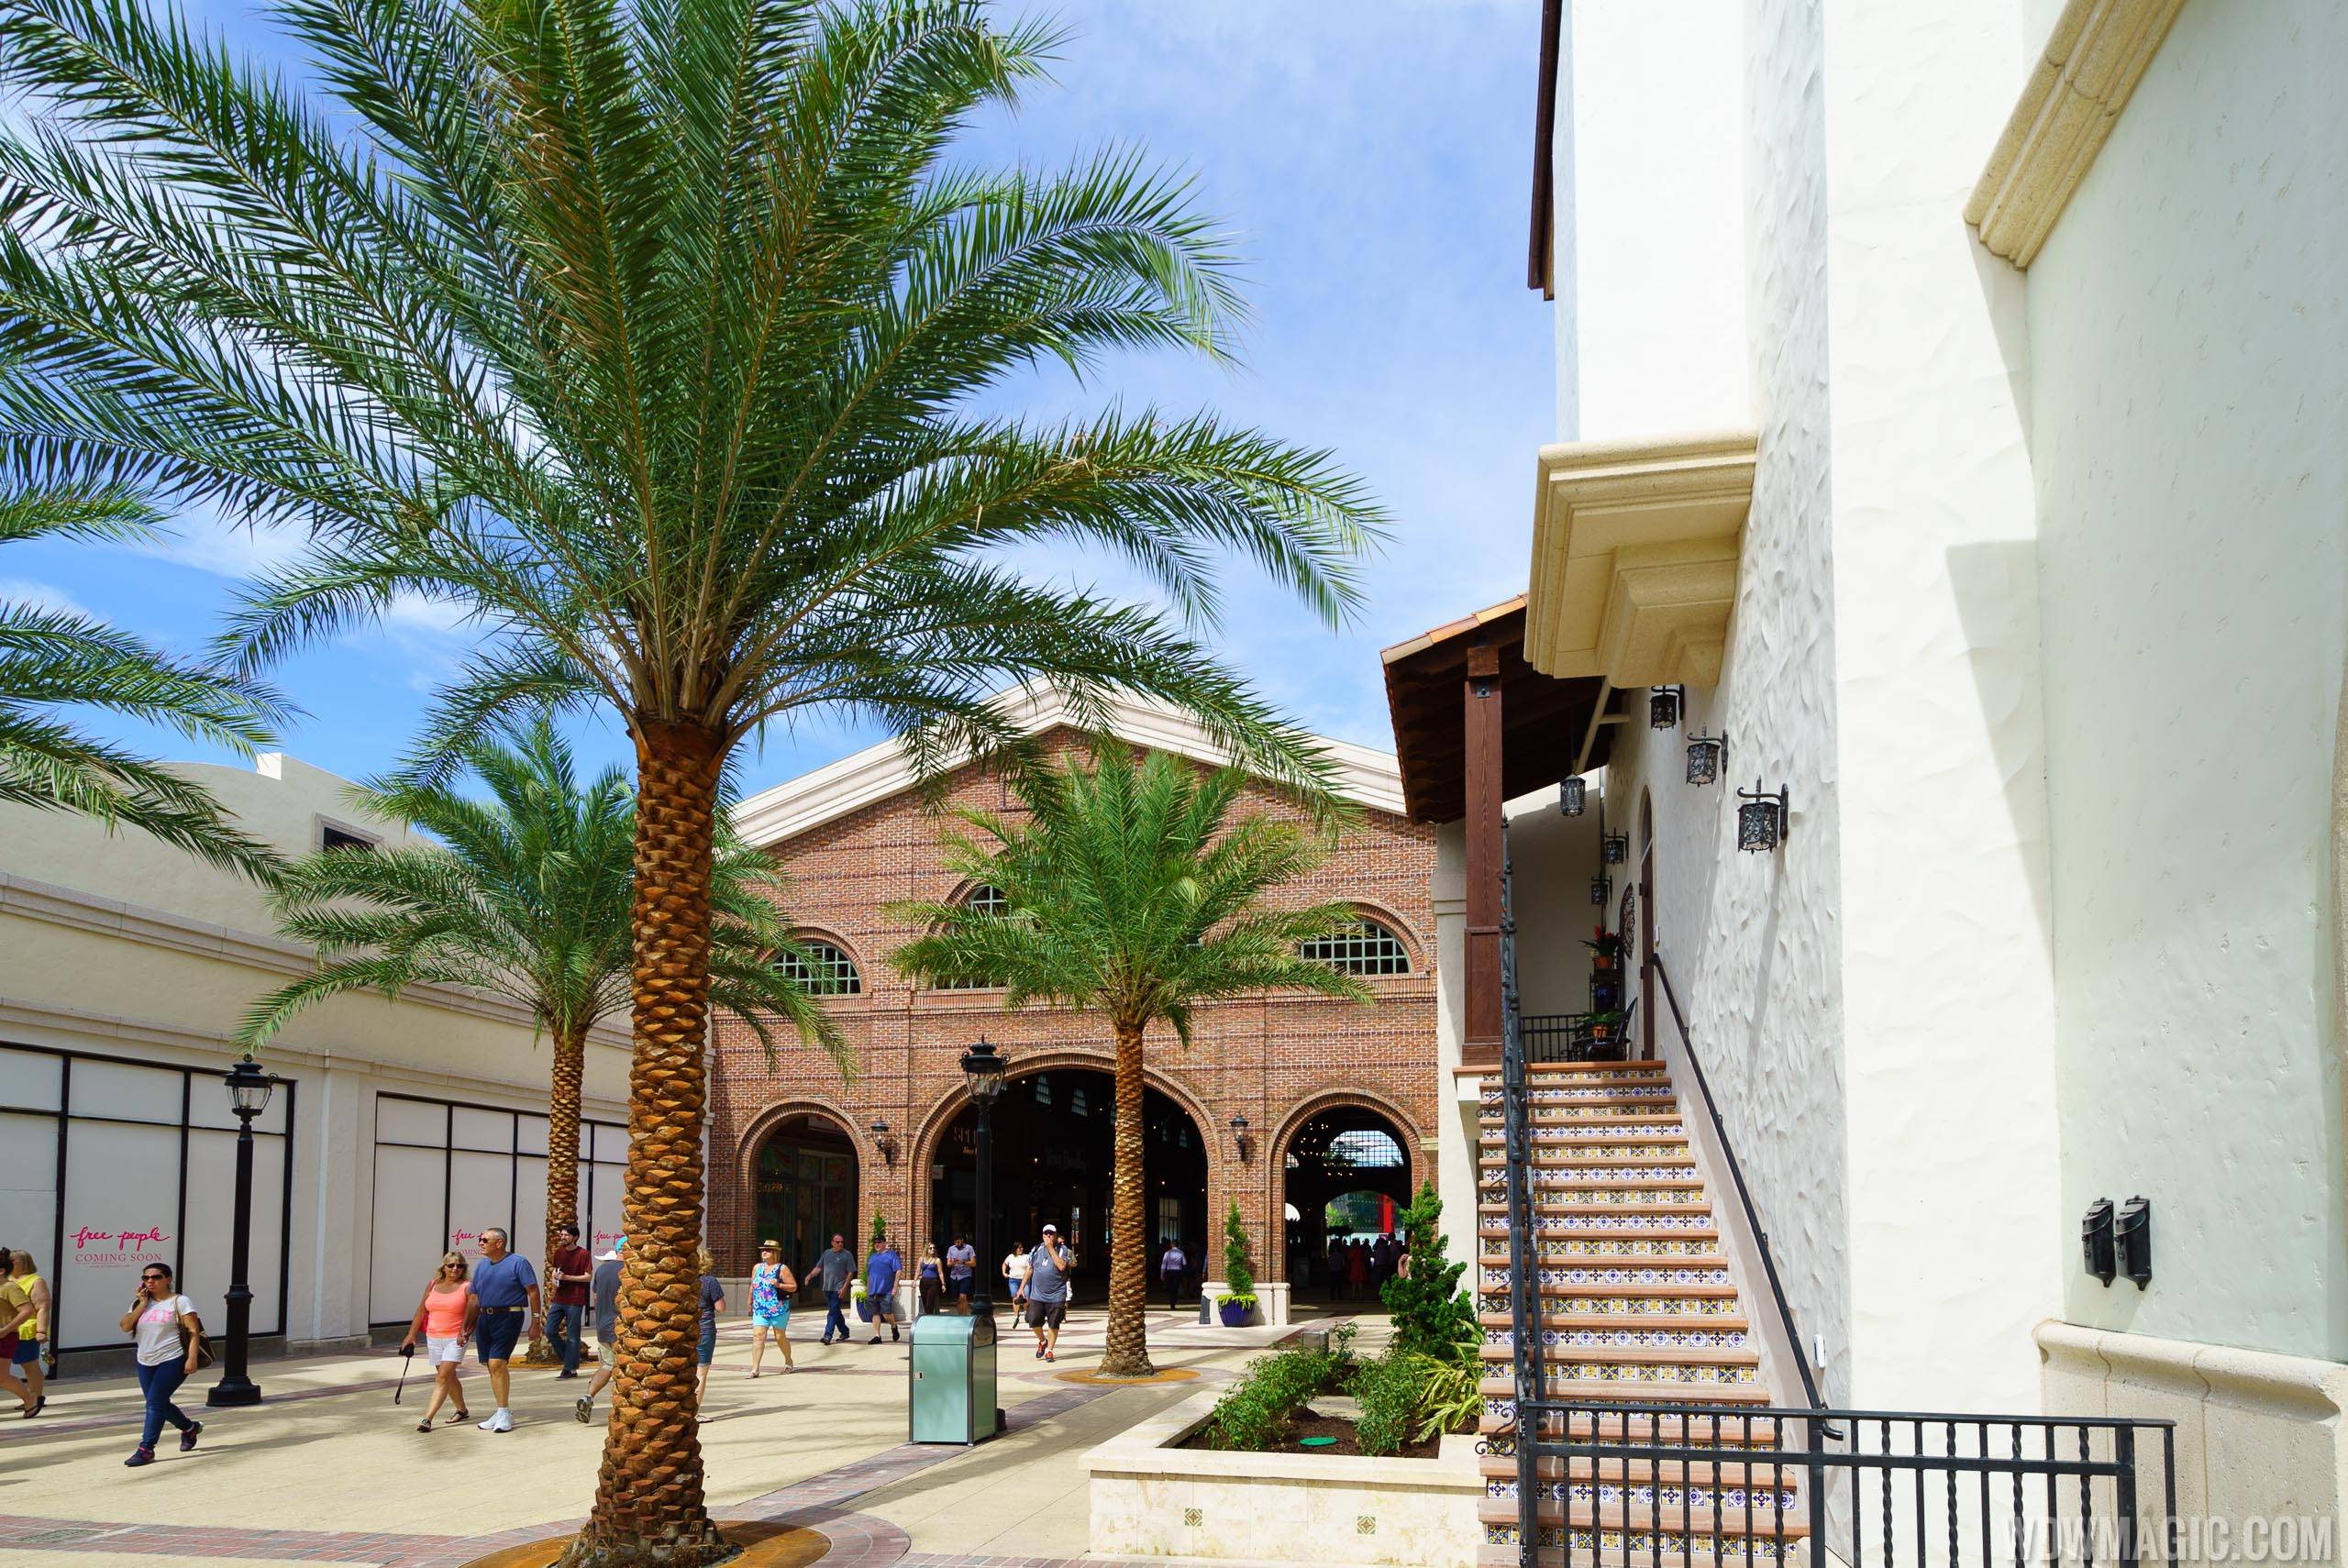 VIDEO - Take a complete walk-through of the Town Center at Disney Springs